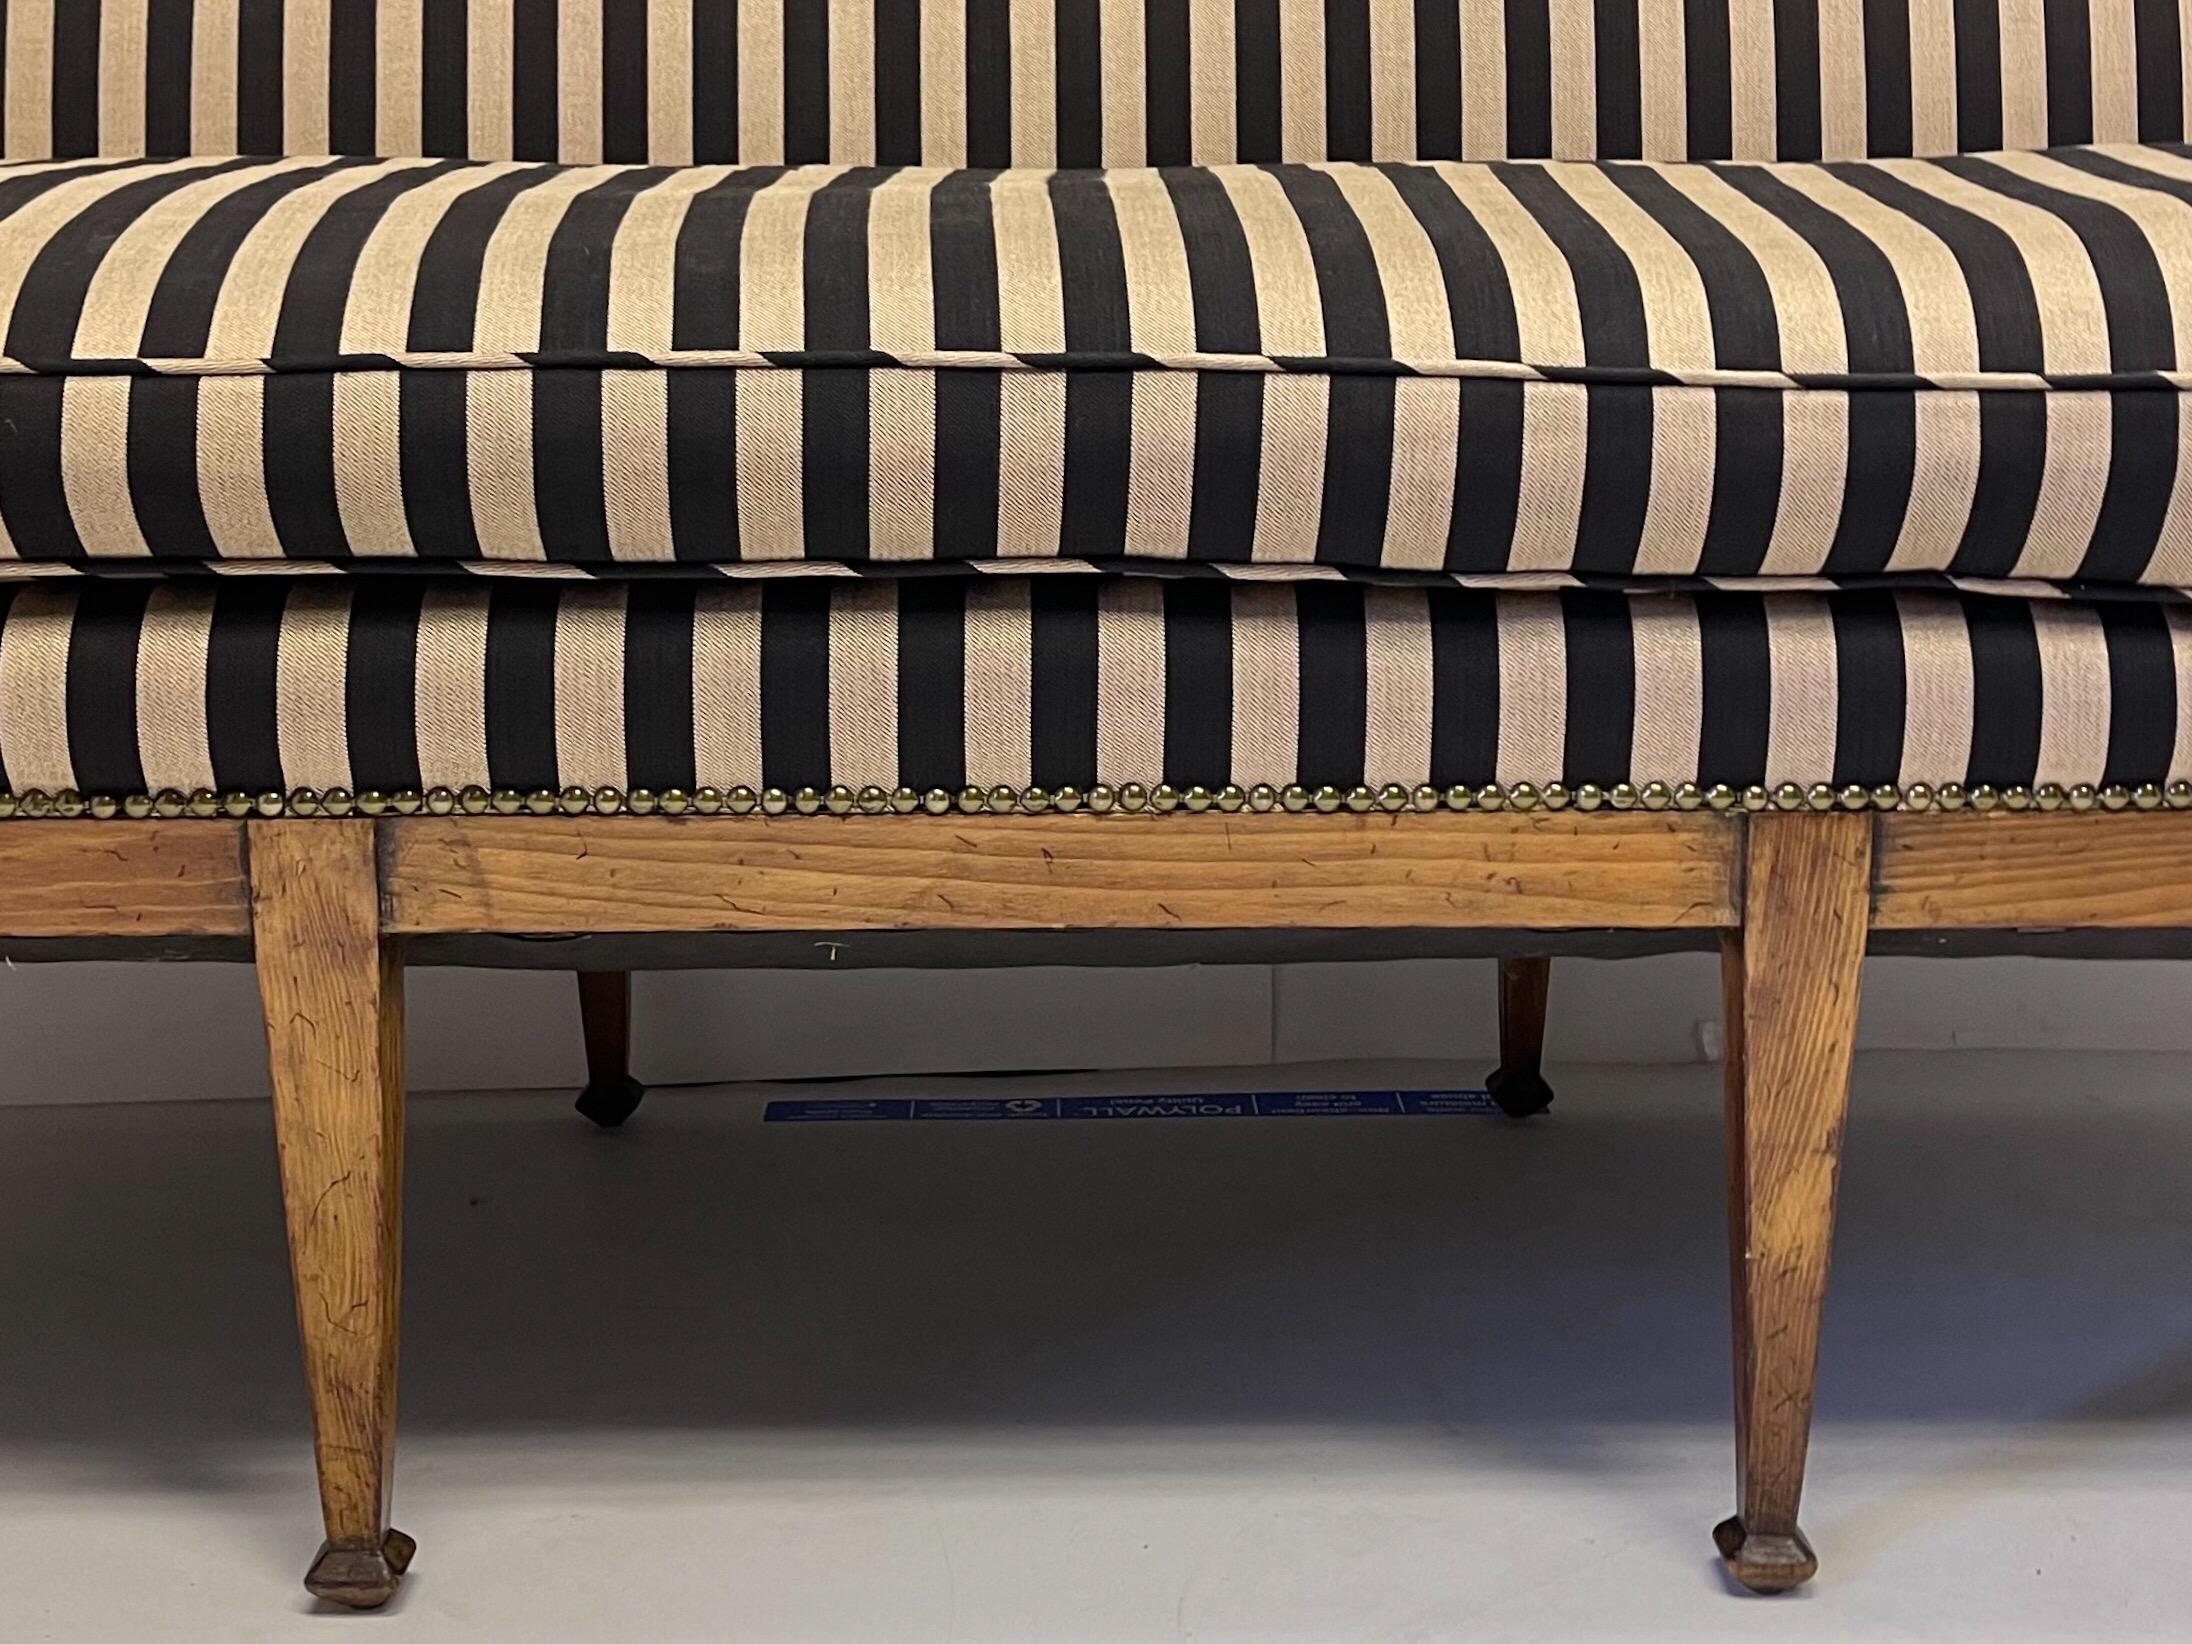 This is an early 20th century carved fruitwood Biedermeier style Italian sofa. The cushion is down, and the upholstery is vintage and shows lite wear. It is unmarked.